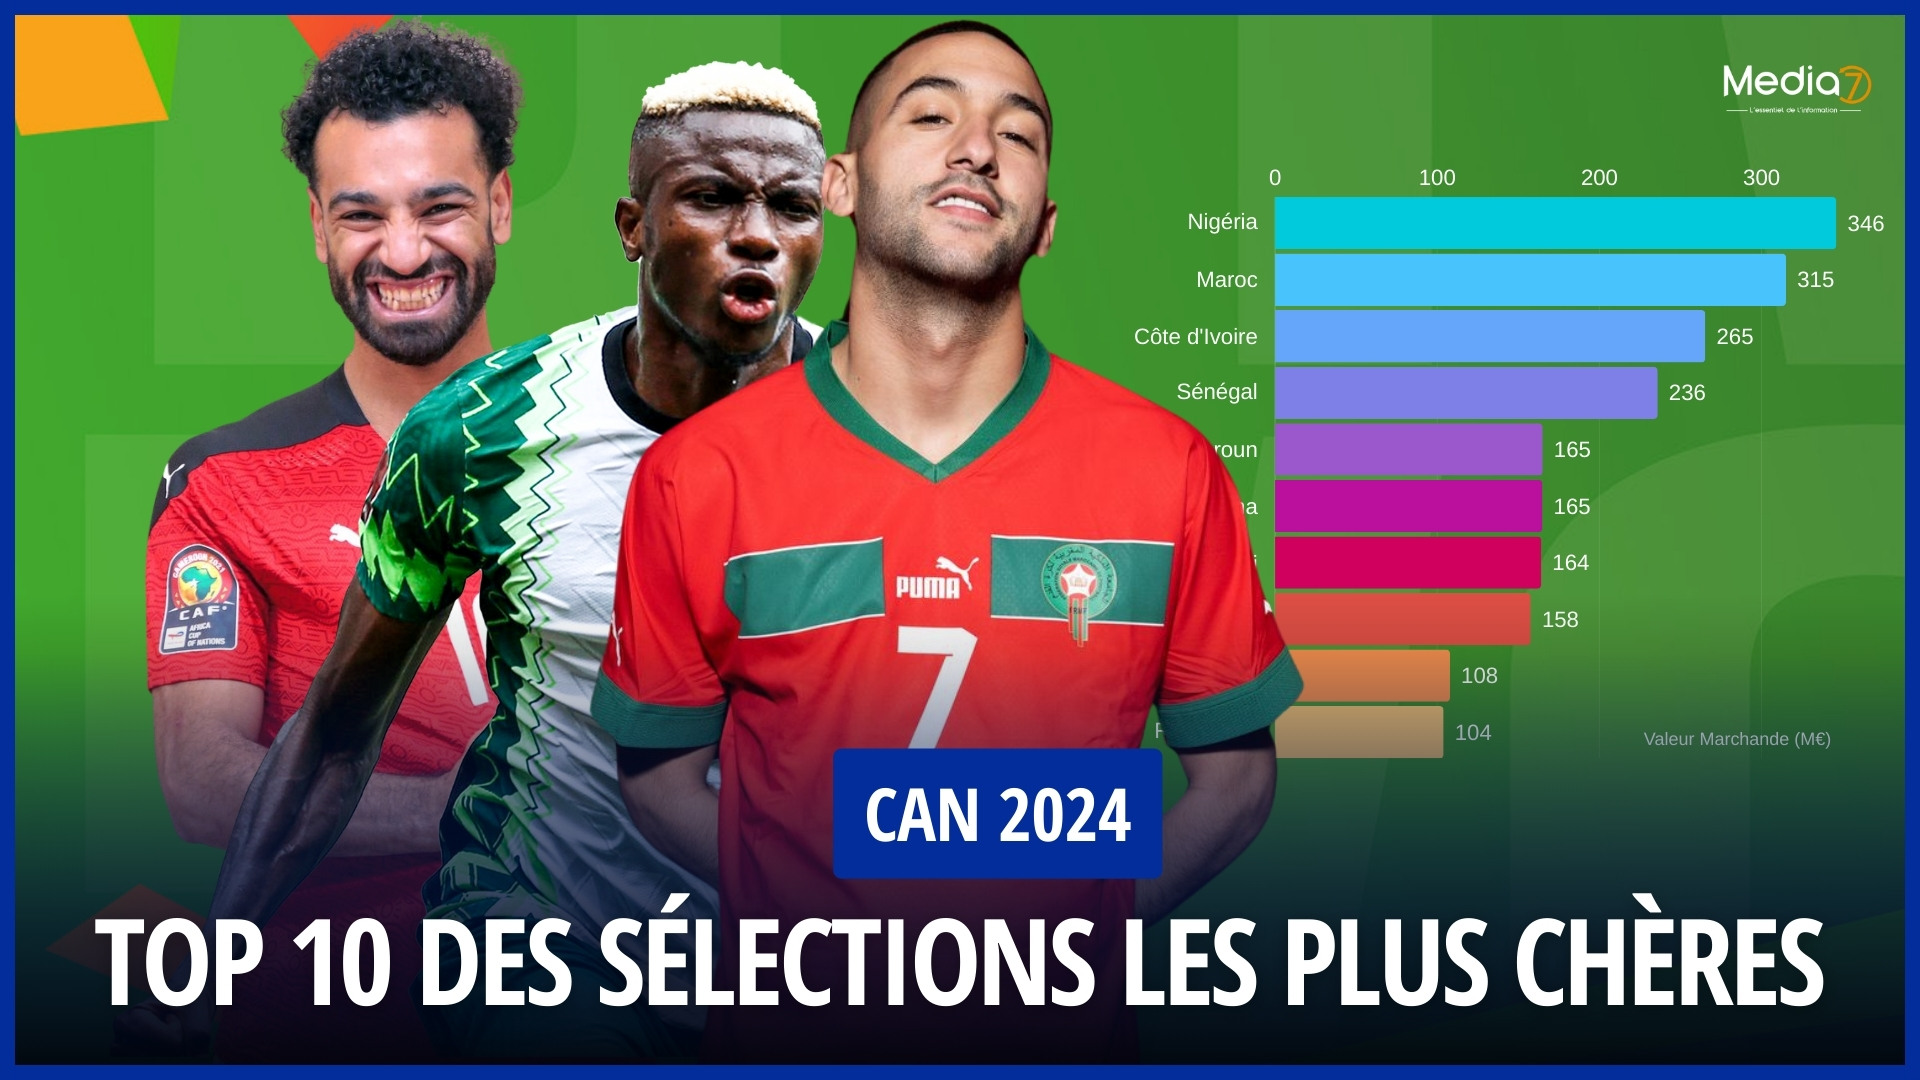 Morocco Among the Top 10 Most Expensive Selections at CAN 2024 - Media7